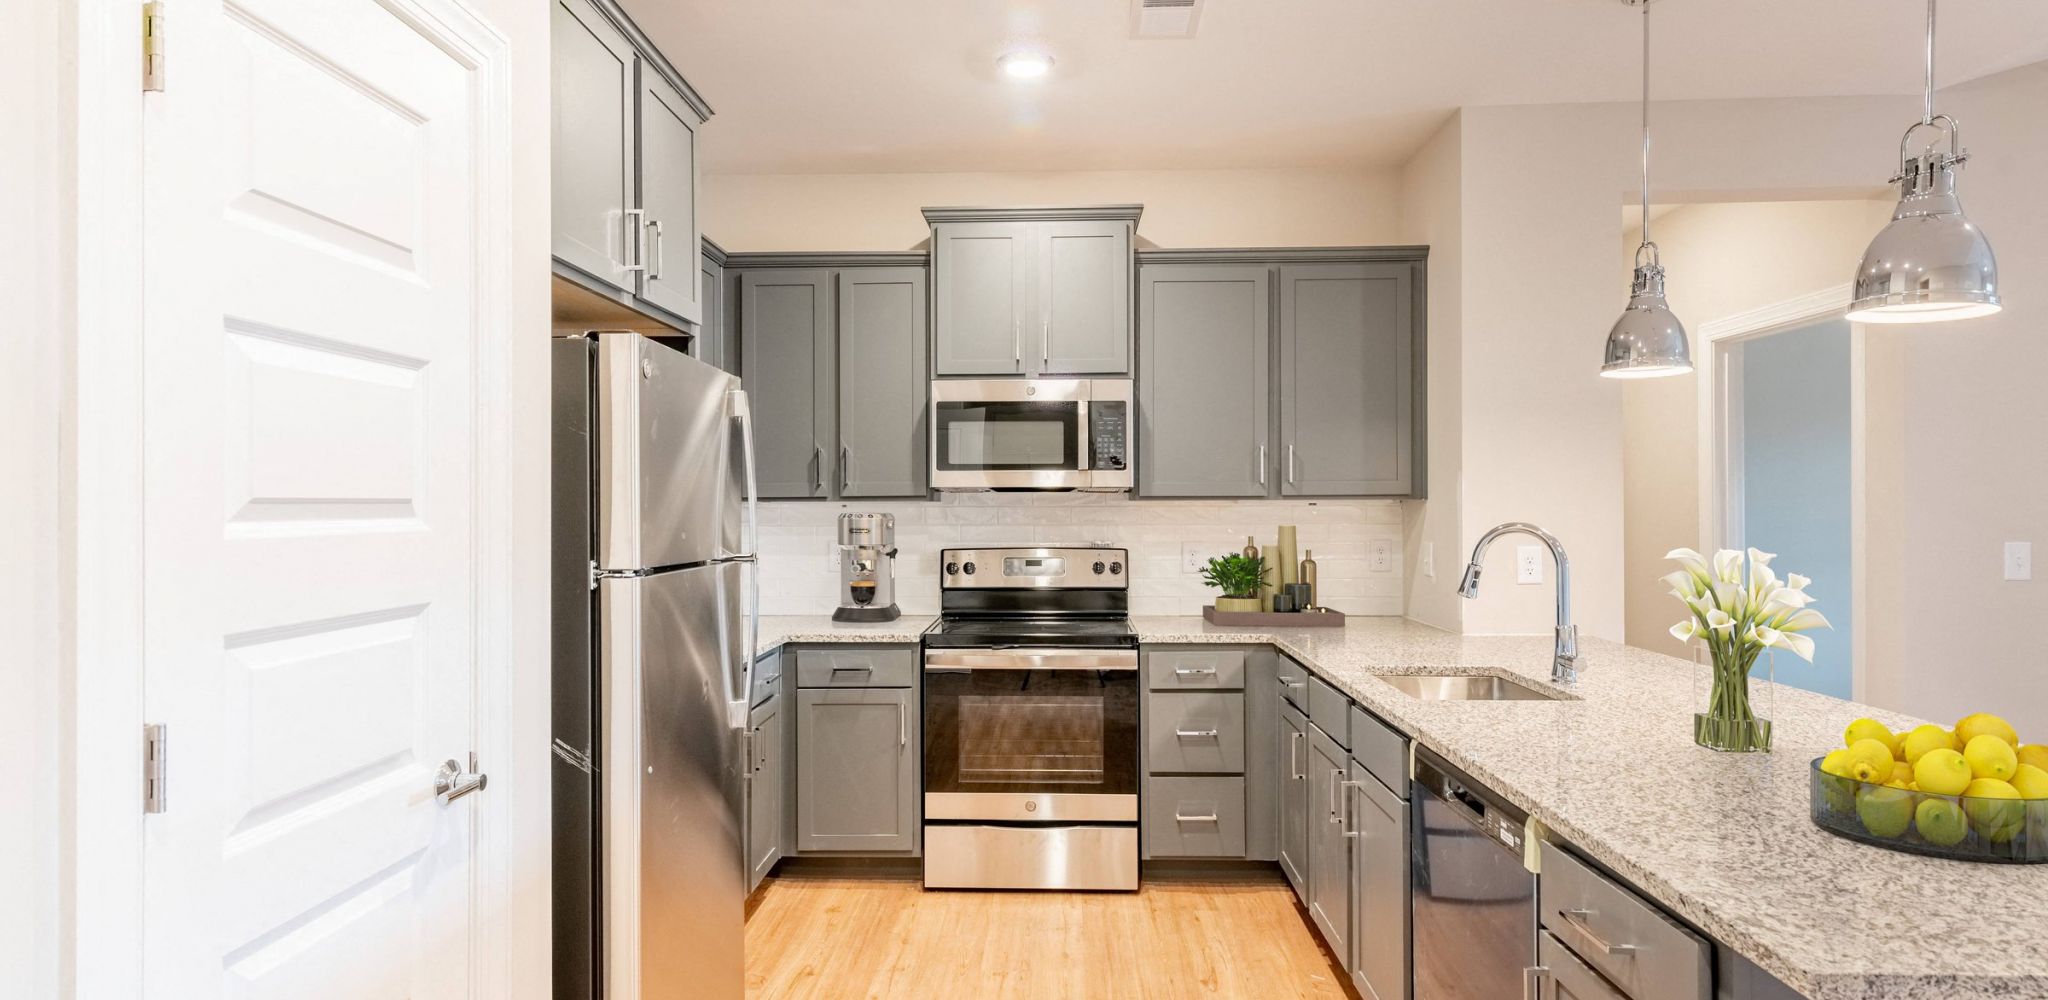 Hawthorne at the Crest apartment kitchen with grey cabinets, stainless steel appliances, and granite countertops